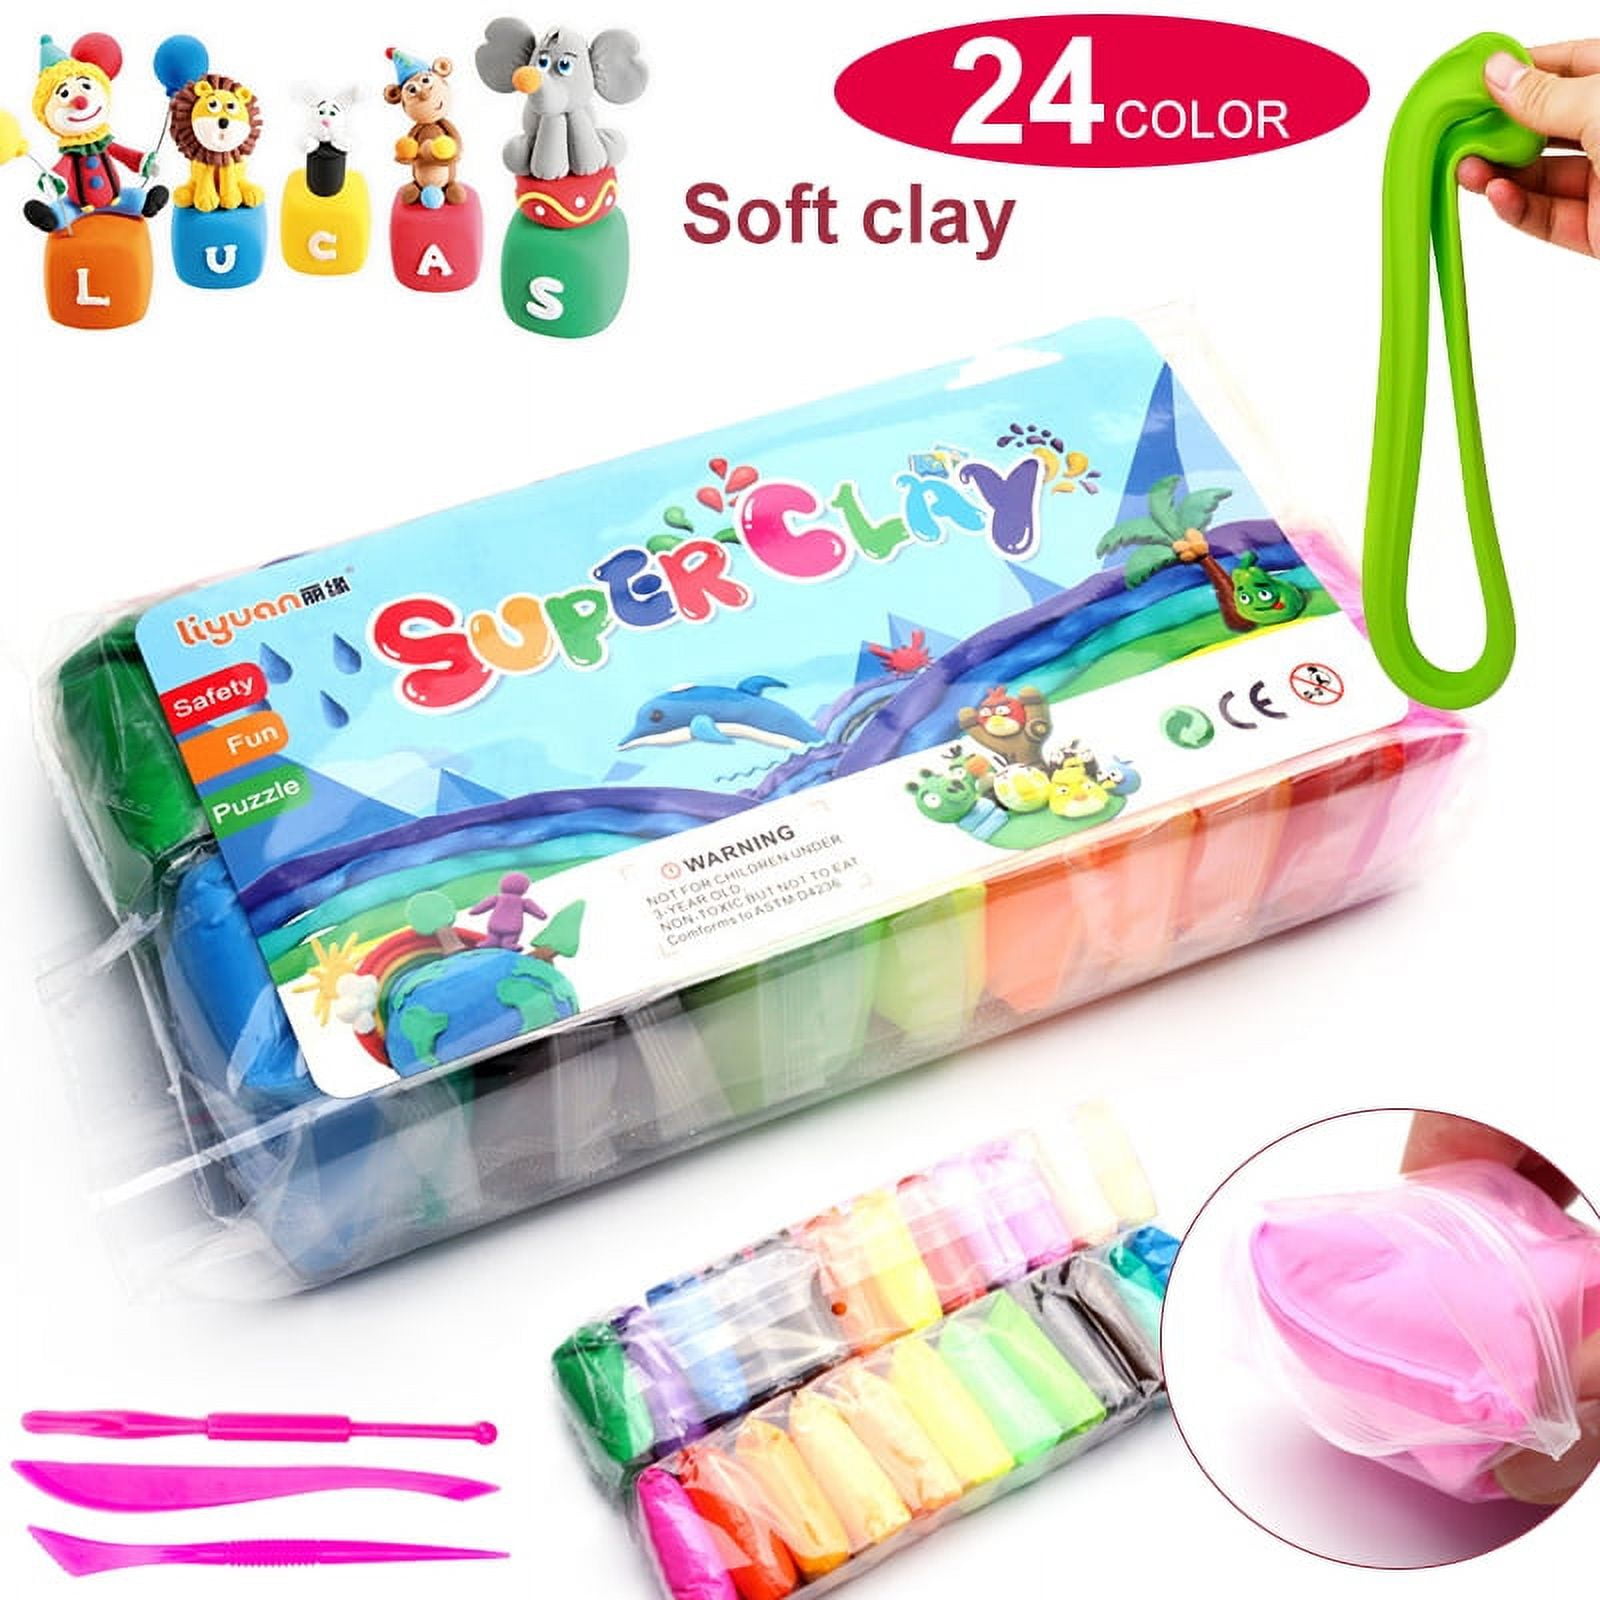 TOY Life Diamond Painting Kit For Kids with Keychains, Crafts for